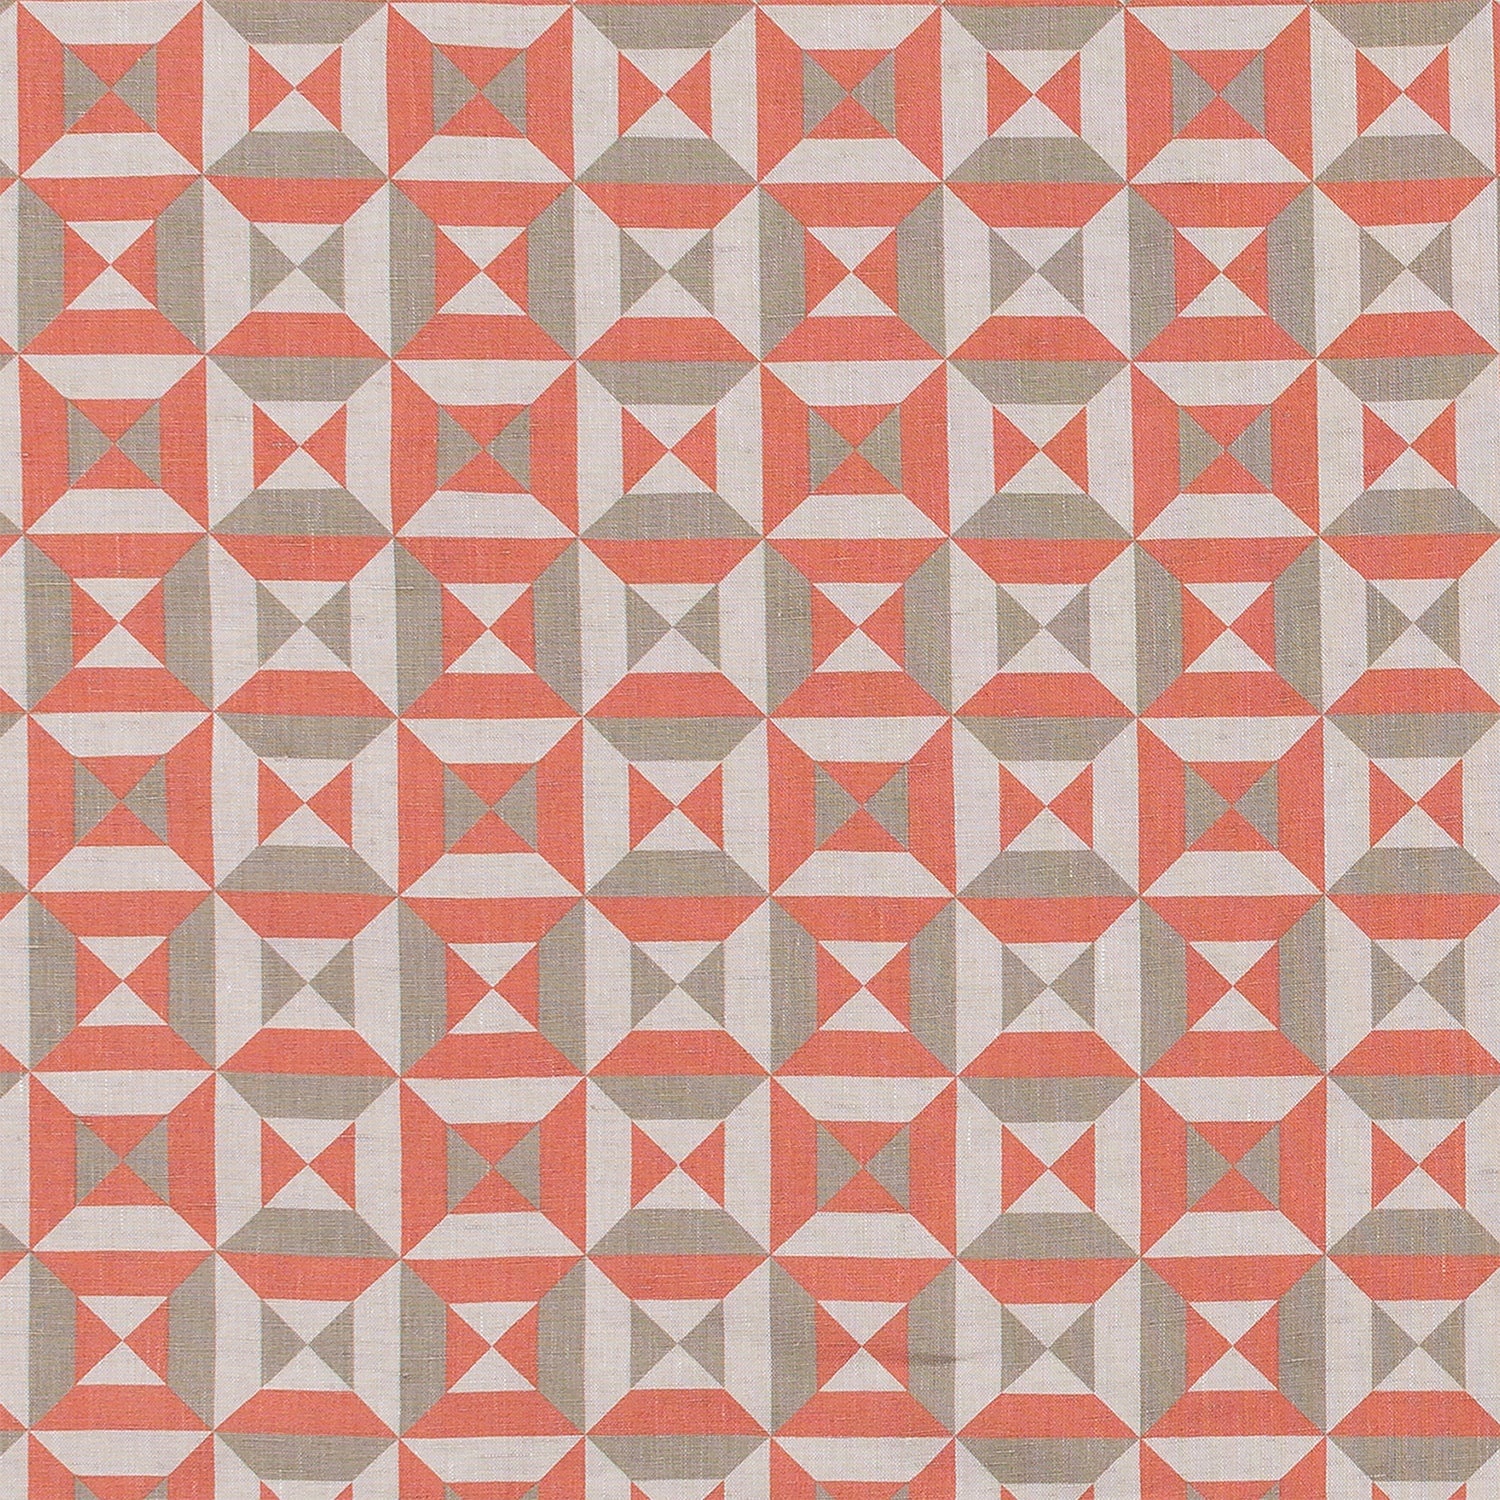 Fabric in a geometric grid print in cream, gray and coral.